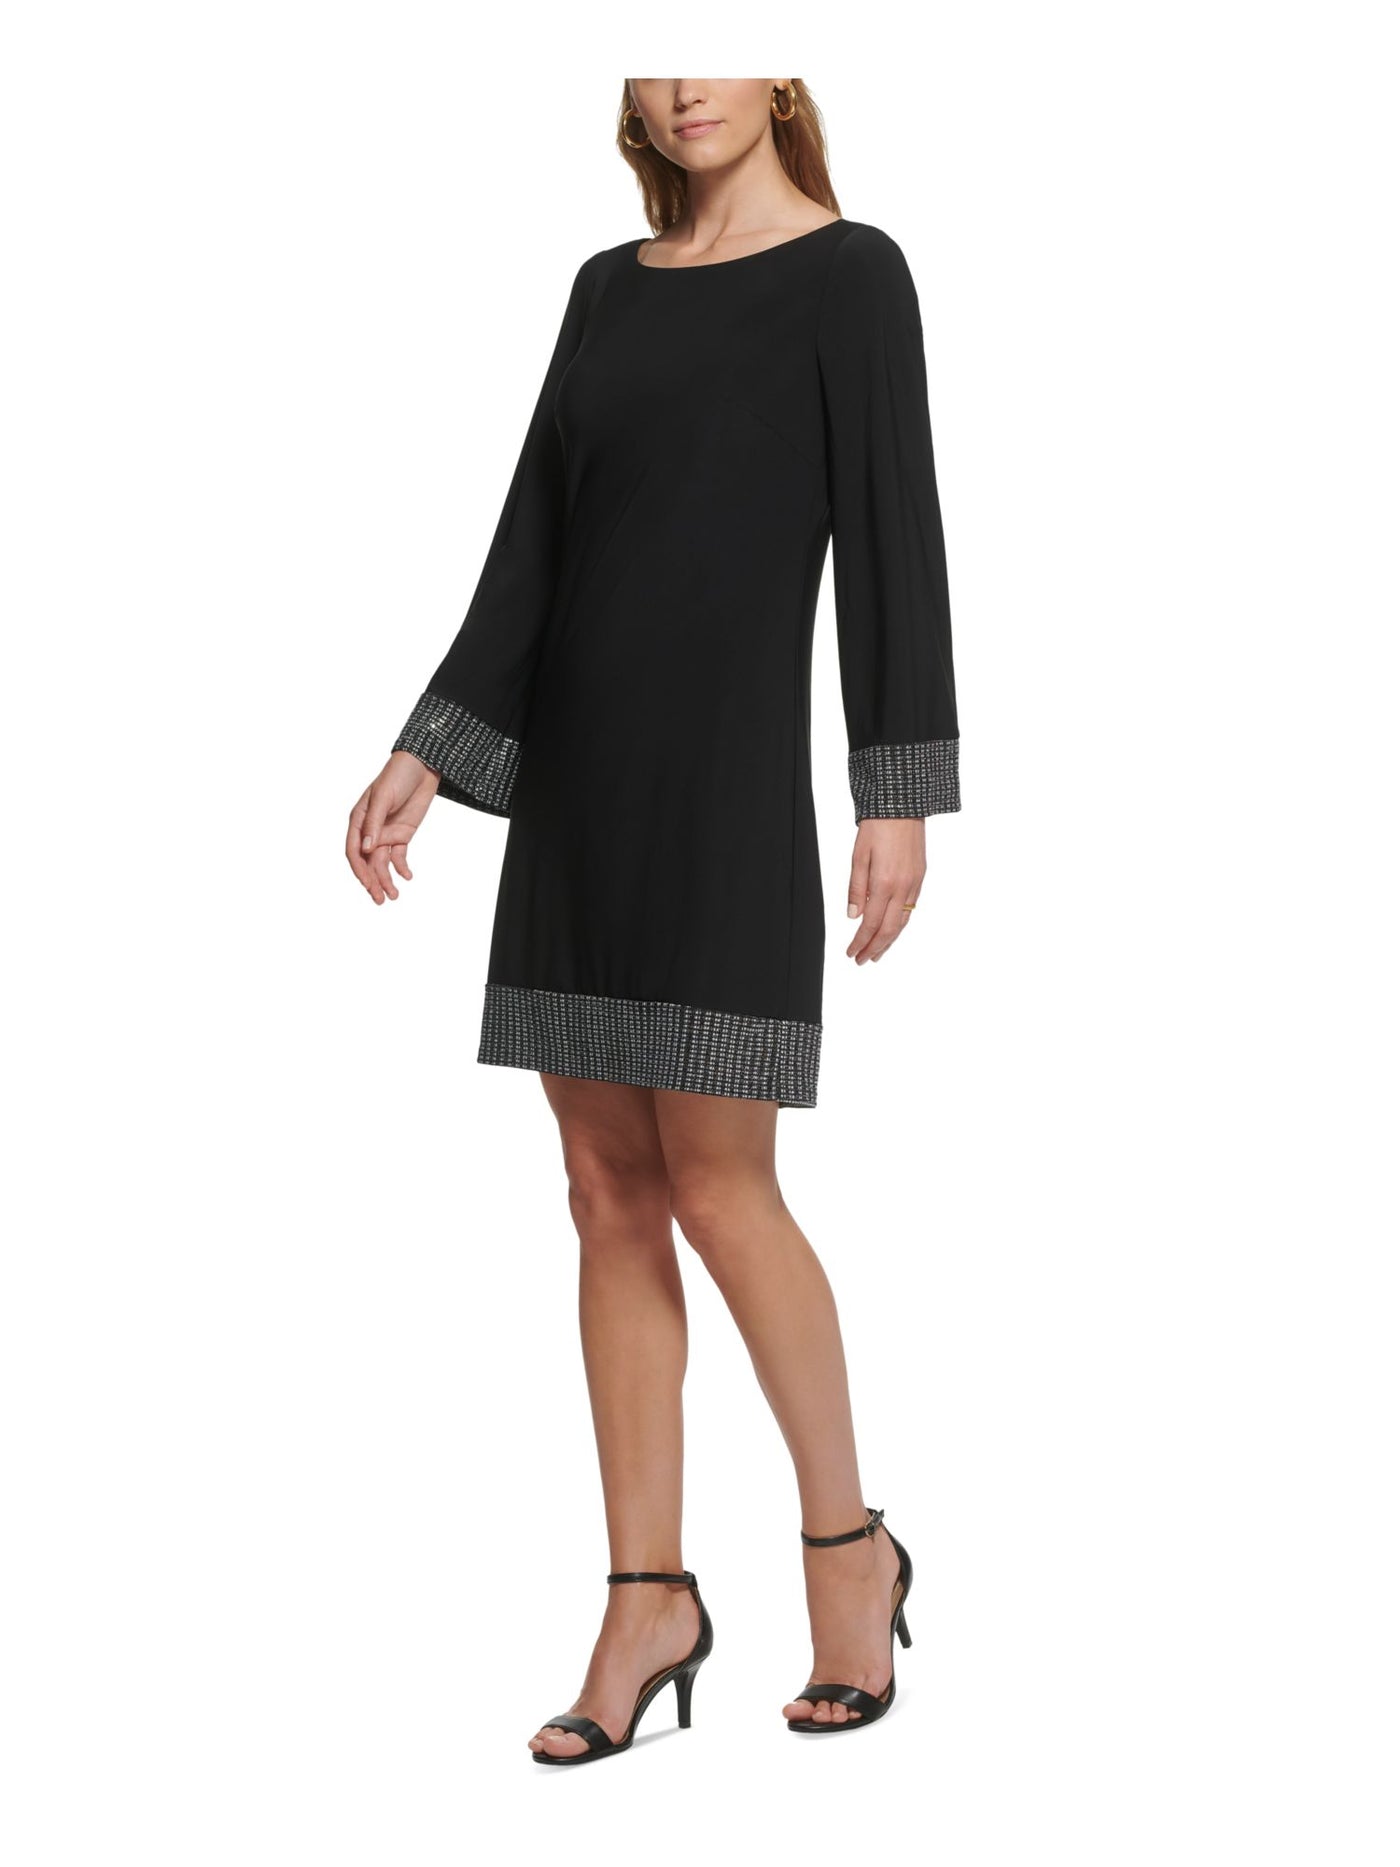 JESSICA HOWARD Womens Black Embellished Zippered Lined Long Sleeve Boat Neck Above The Knee Party Shift Dress 8